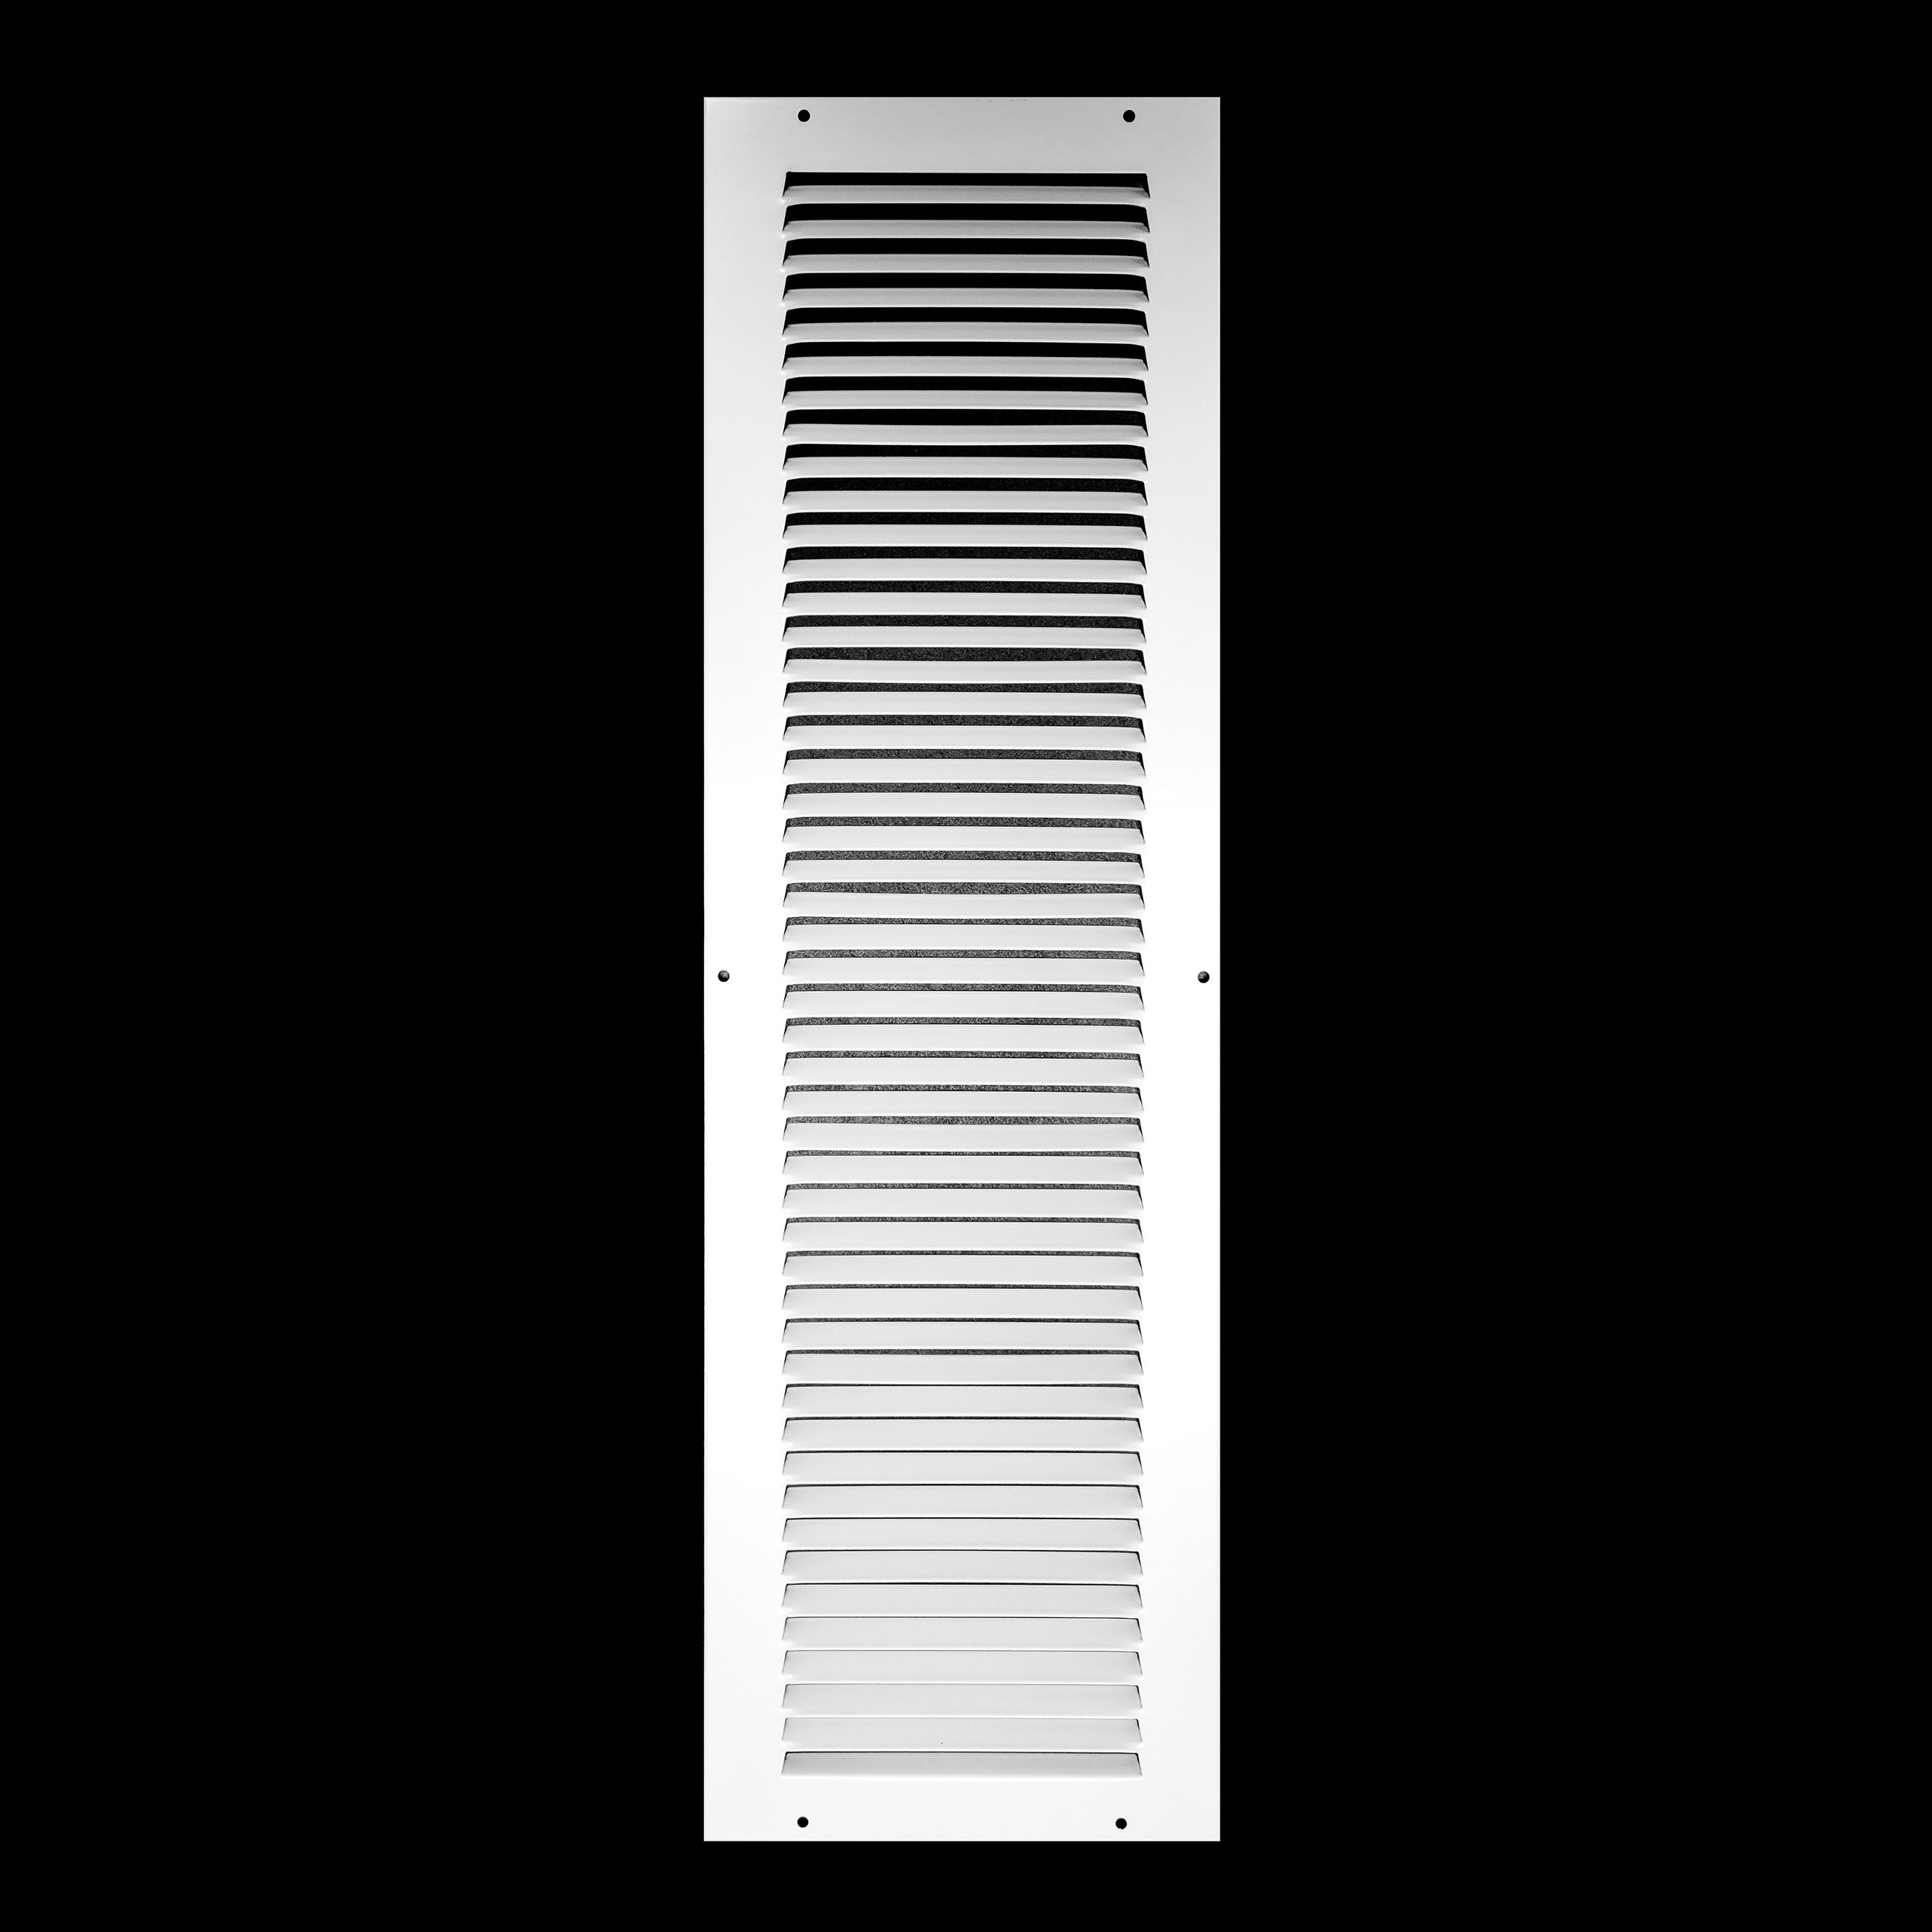 airgrilles 6" x 24" duct opening hd steel return air grille for sidewall and ceiling 7hnd-flt-rg-wh-6x24 038775641005 1